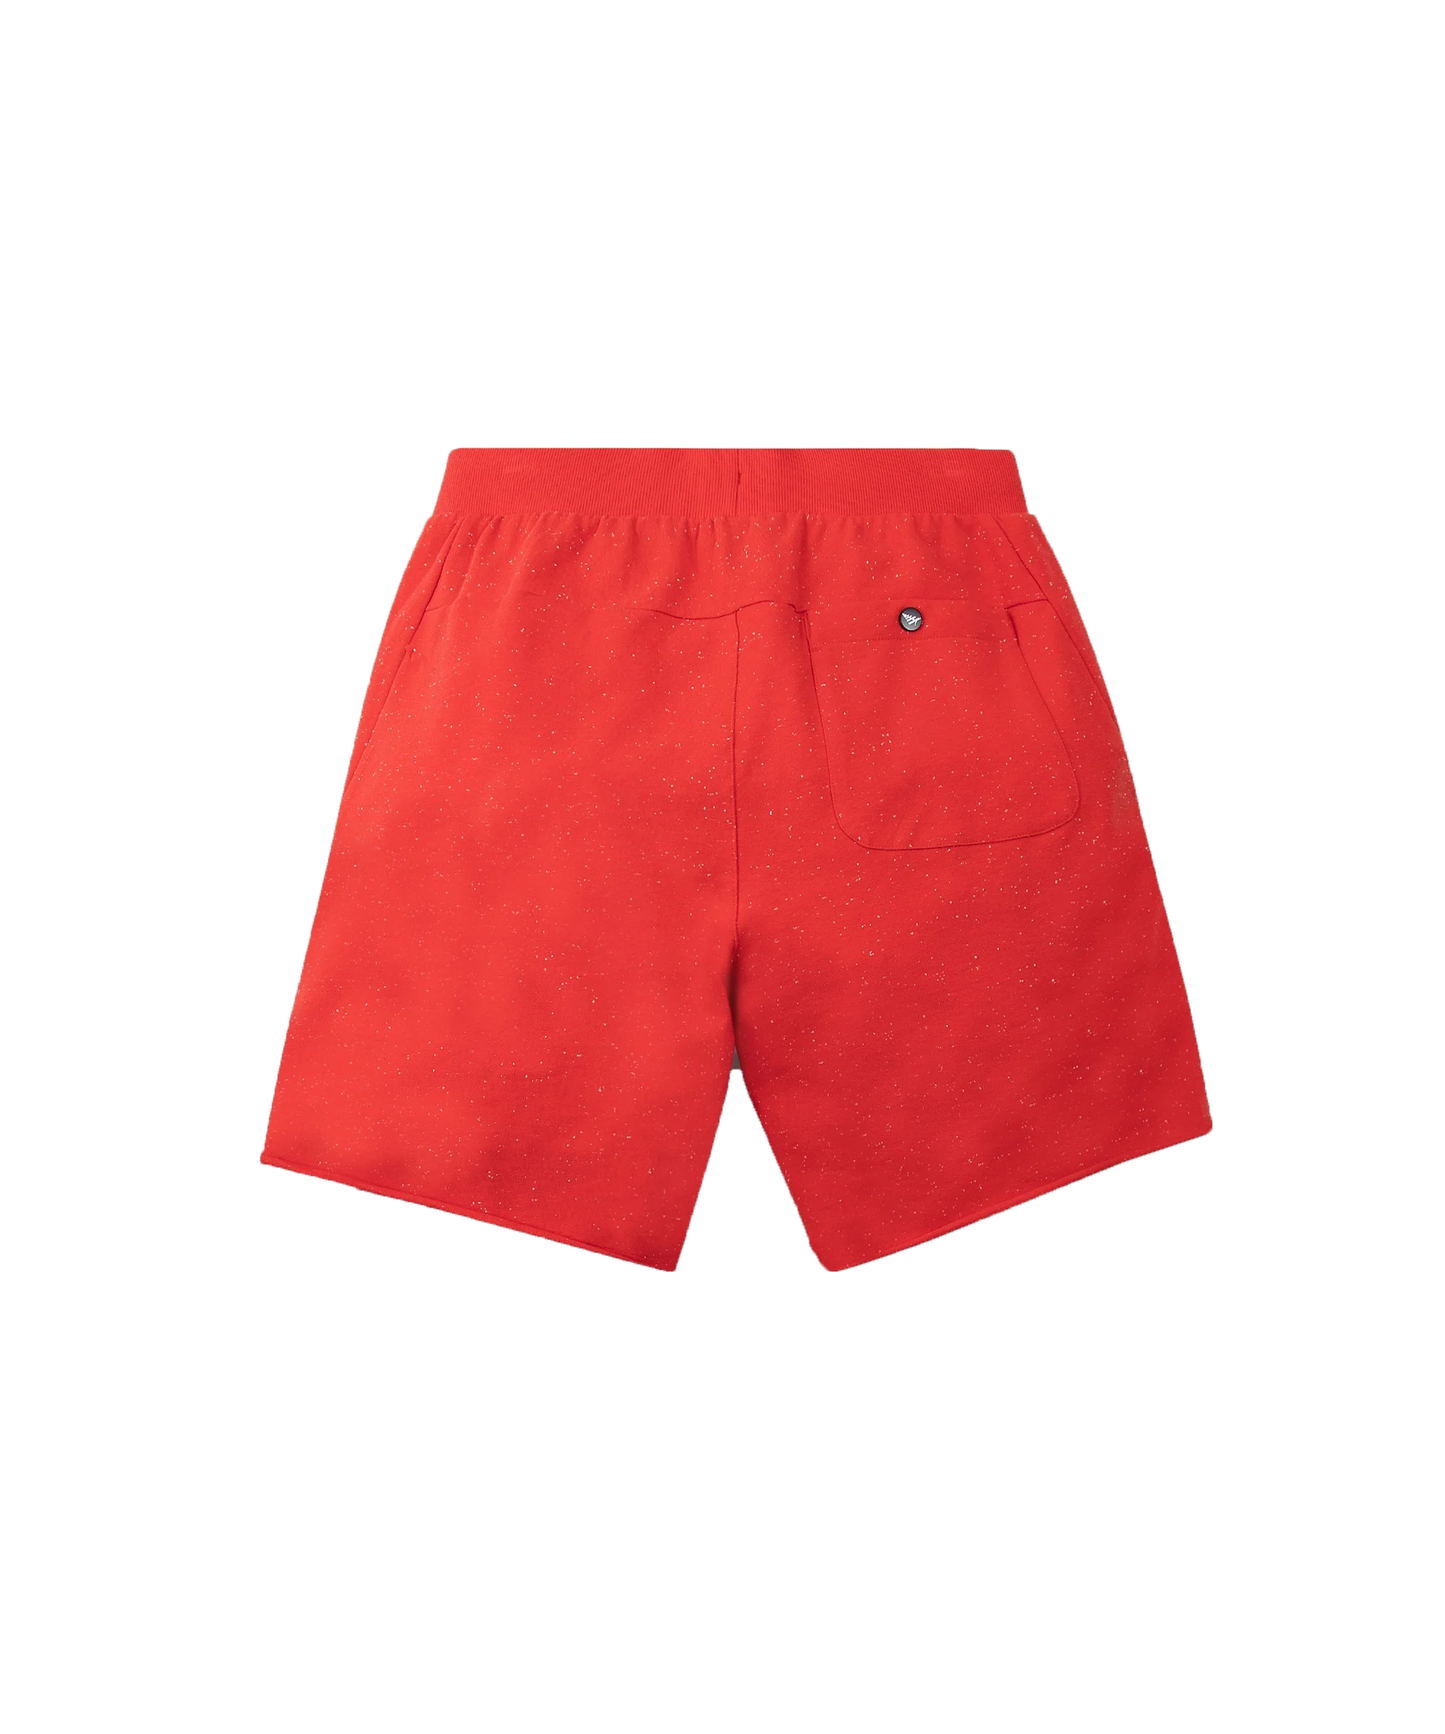 Paper Planes Speckled Planes Shorts - Coral Red